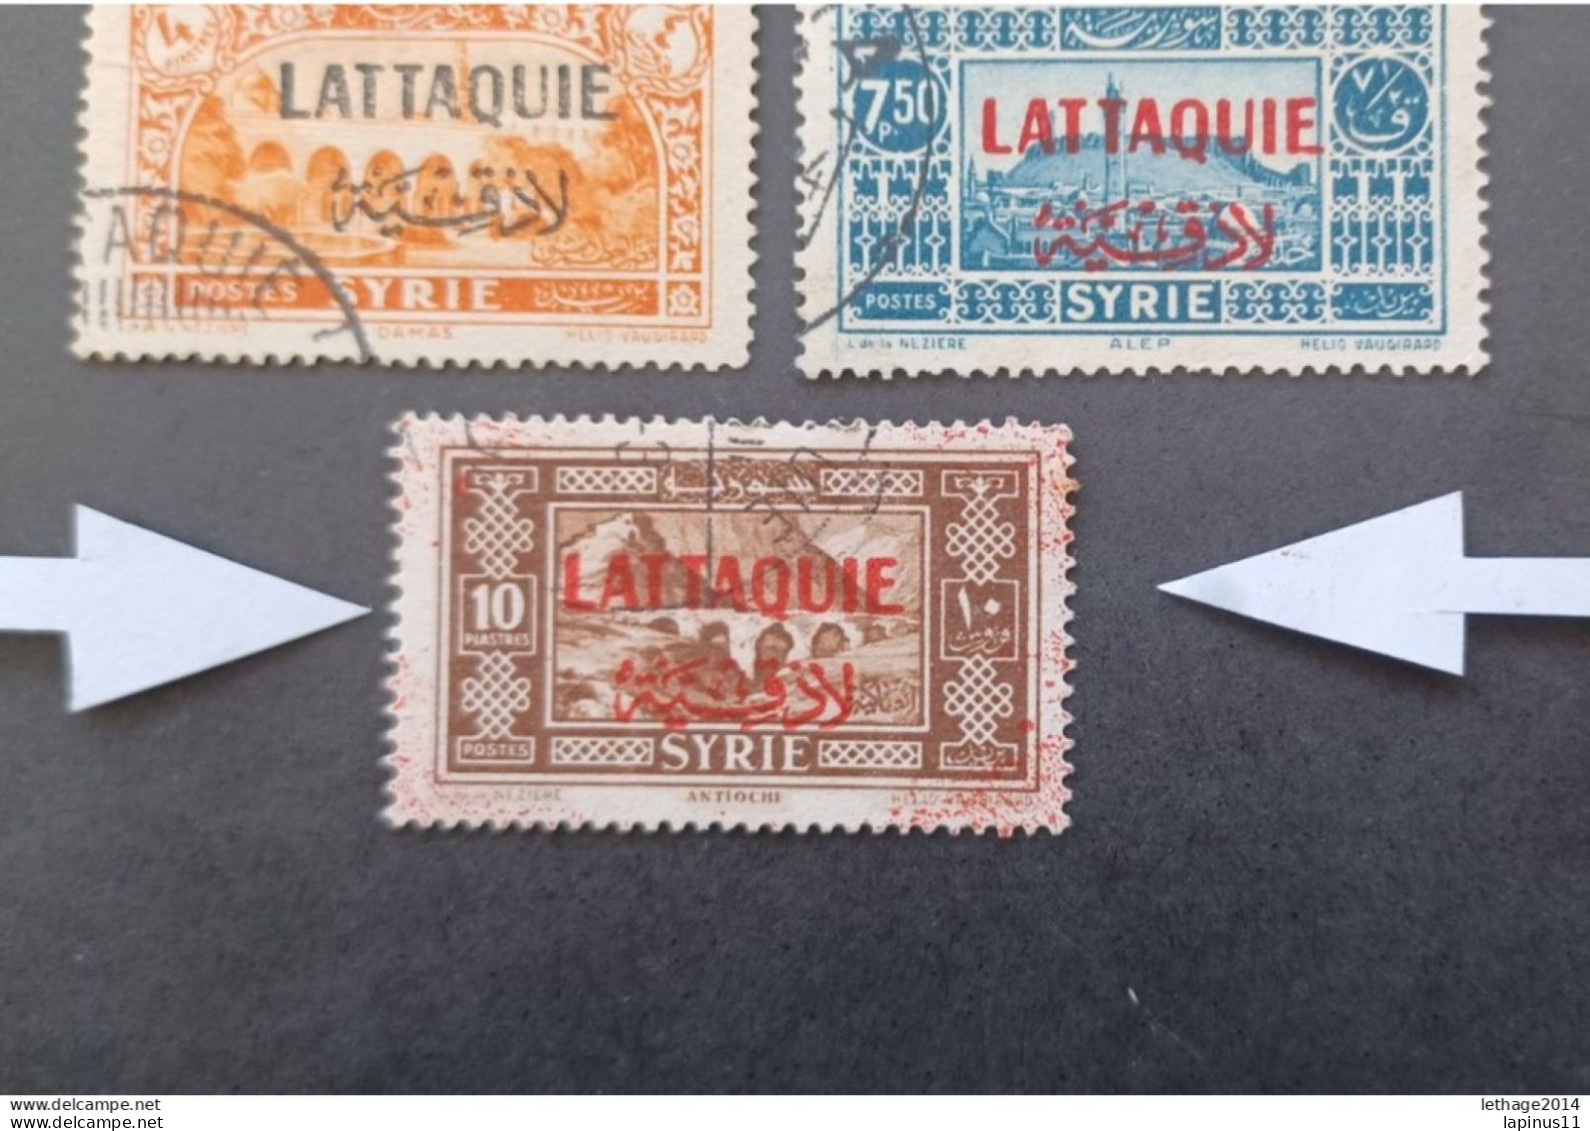 FRENCH OCCUPATION IN SYRIA LATTAQUIE 1940 STAMPS OF SYRIE DE 1930 IN OVERPRINT CAT YVERT N 1....15 RED STAINS - Usati